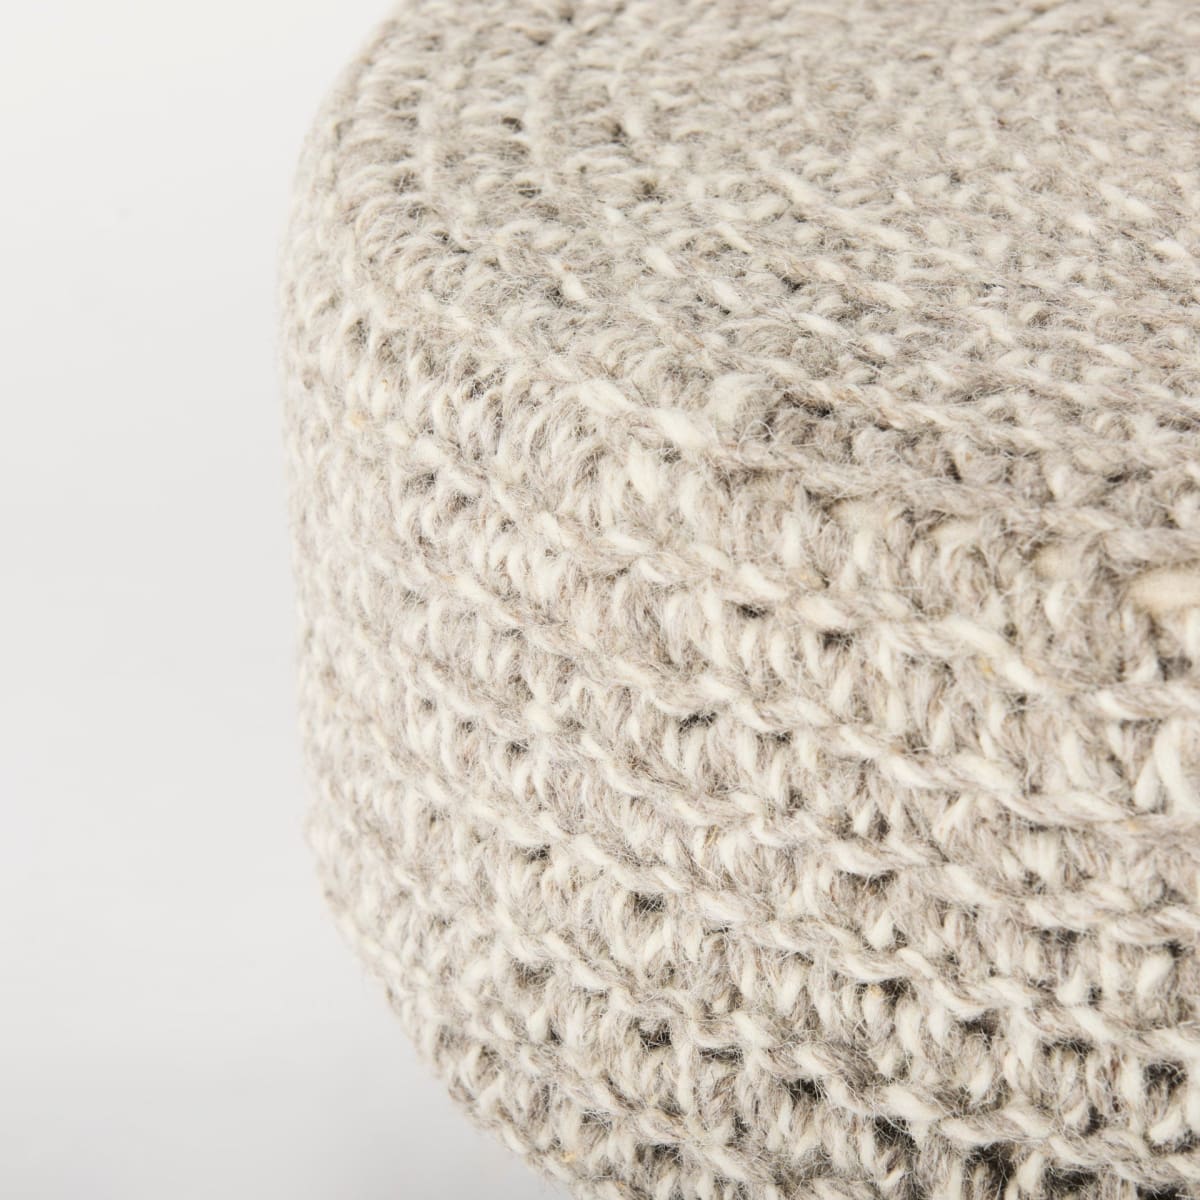 Bina Stool Taupe Wool | Brown Wood | 24L - ottoman-and-poufs